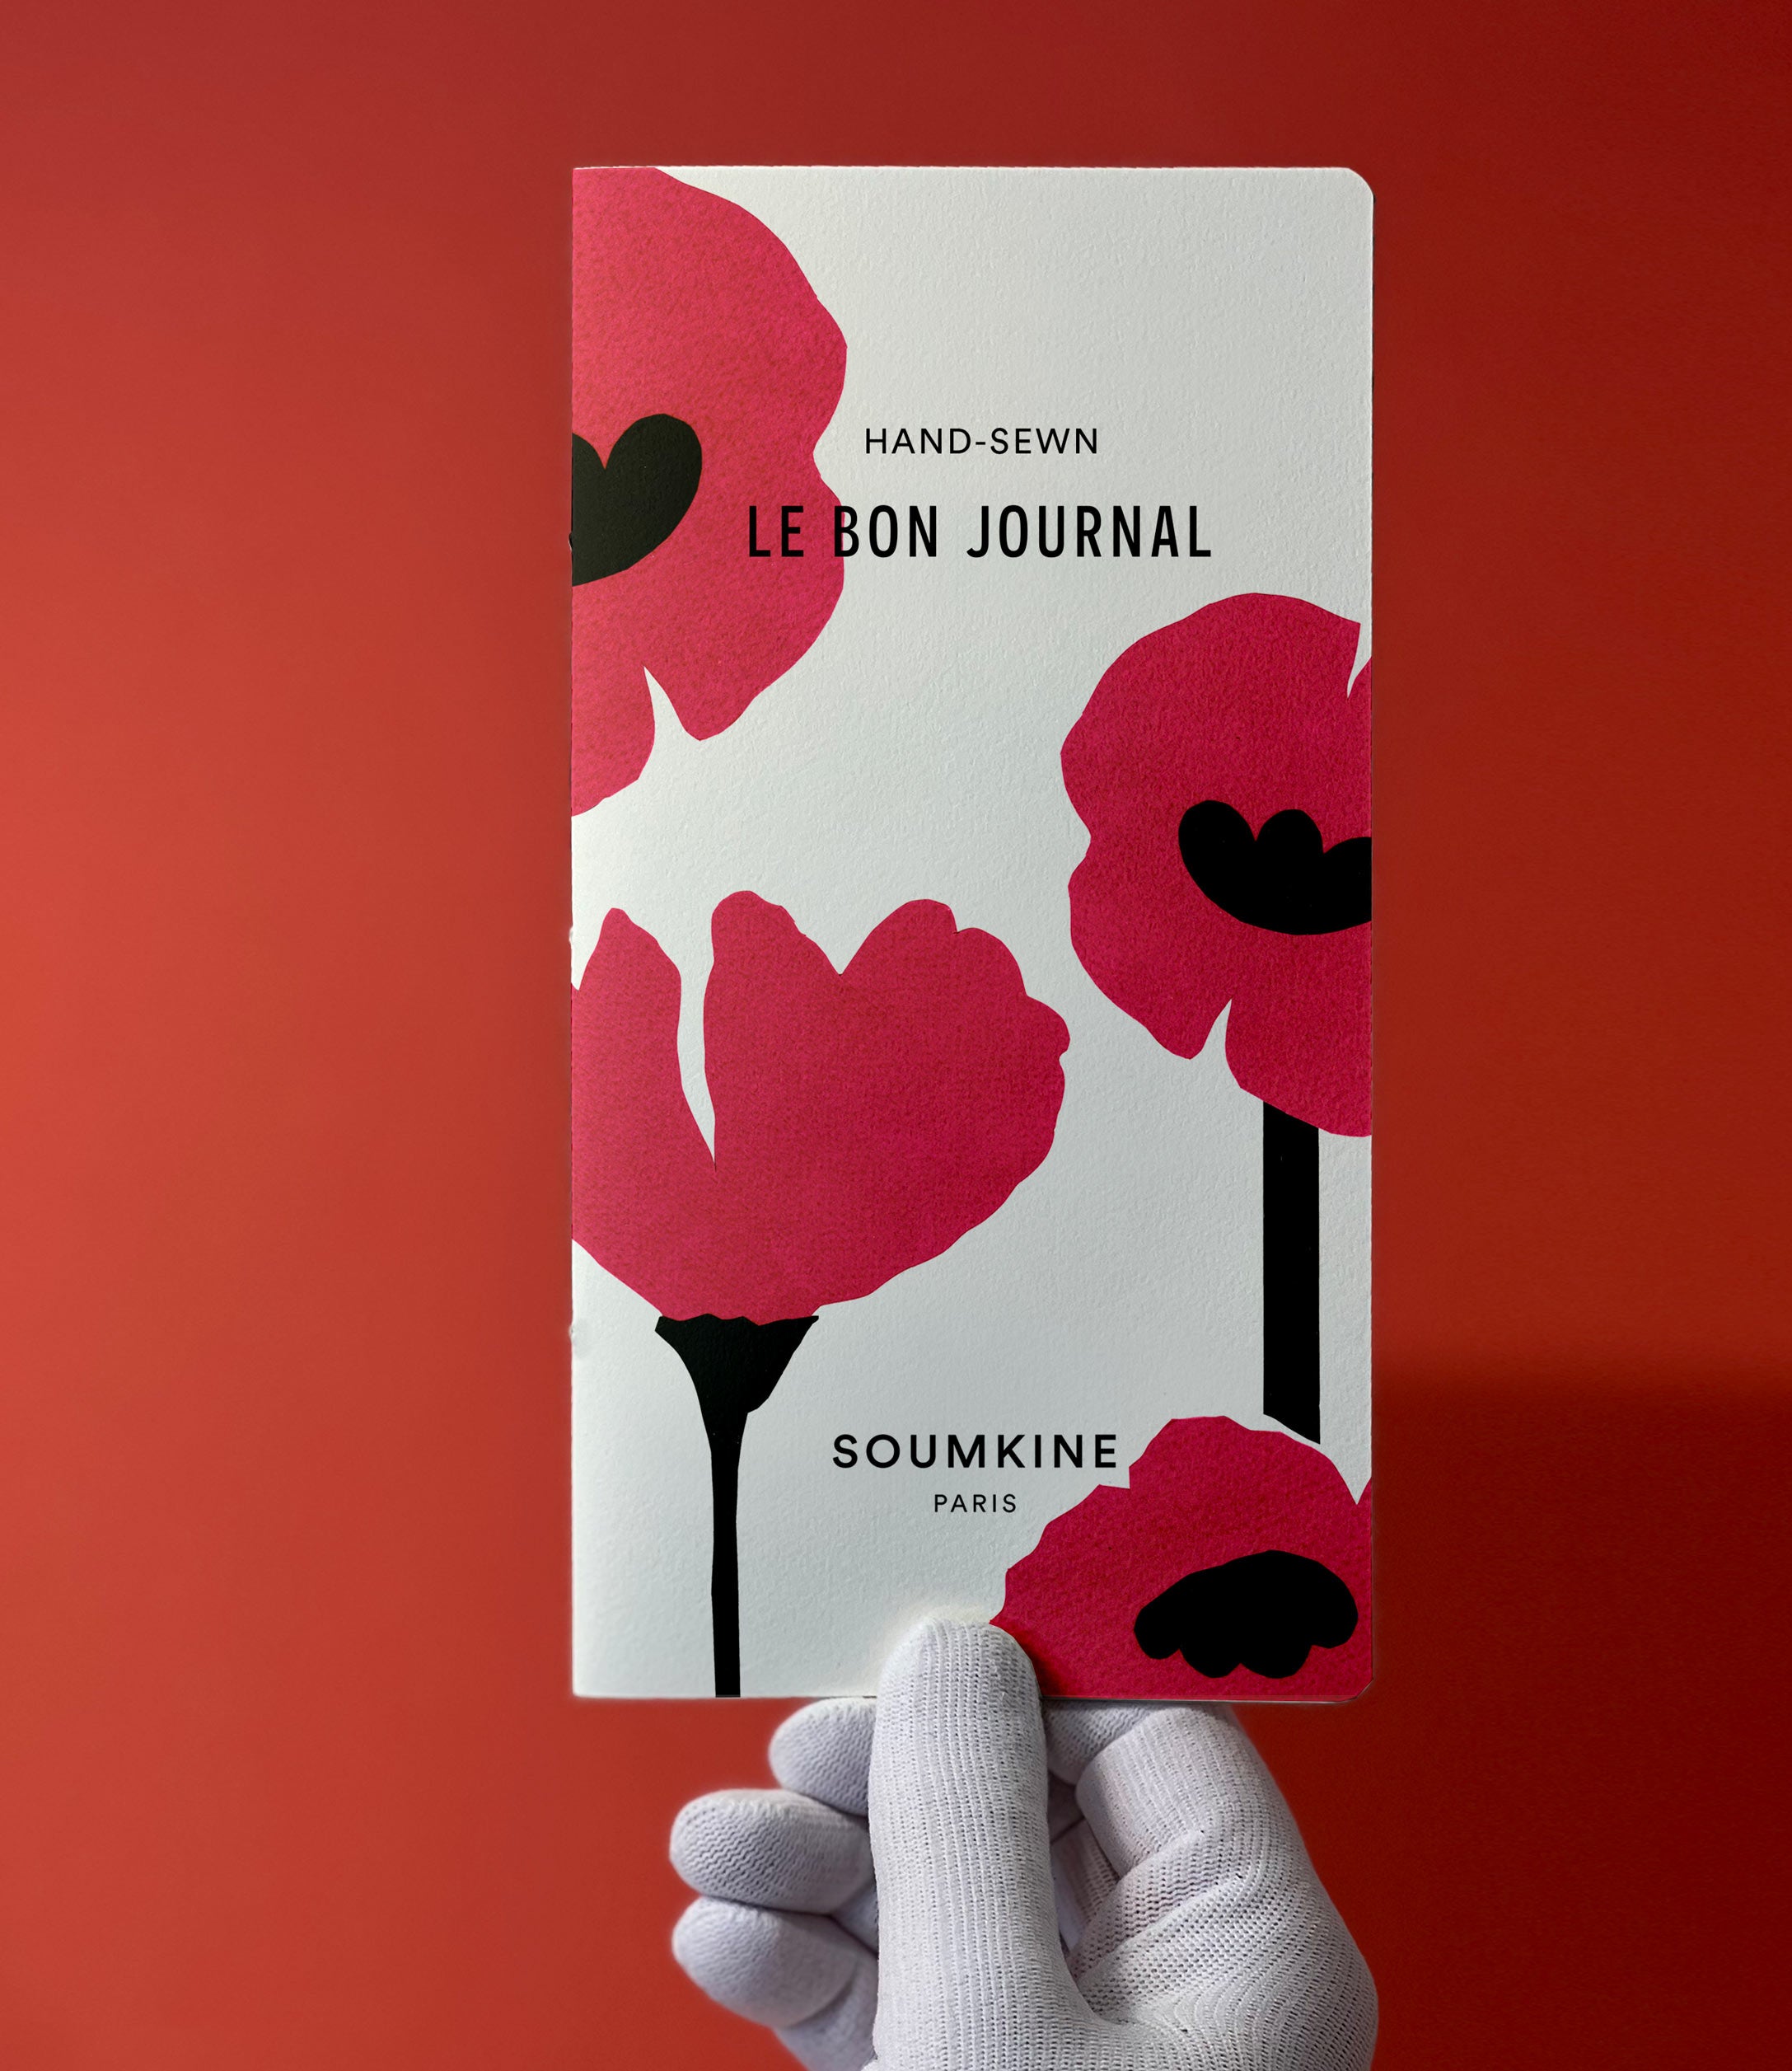 Le Bon Journal. Red Poppies Edition. Slim size.